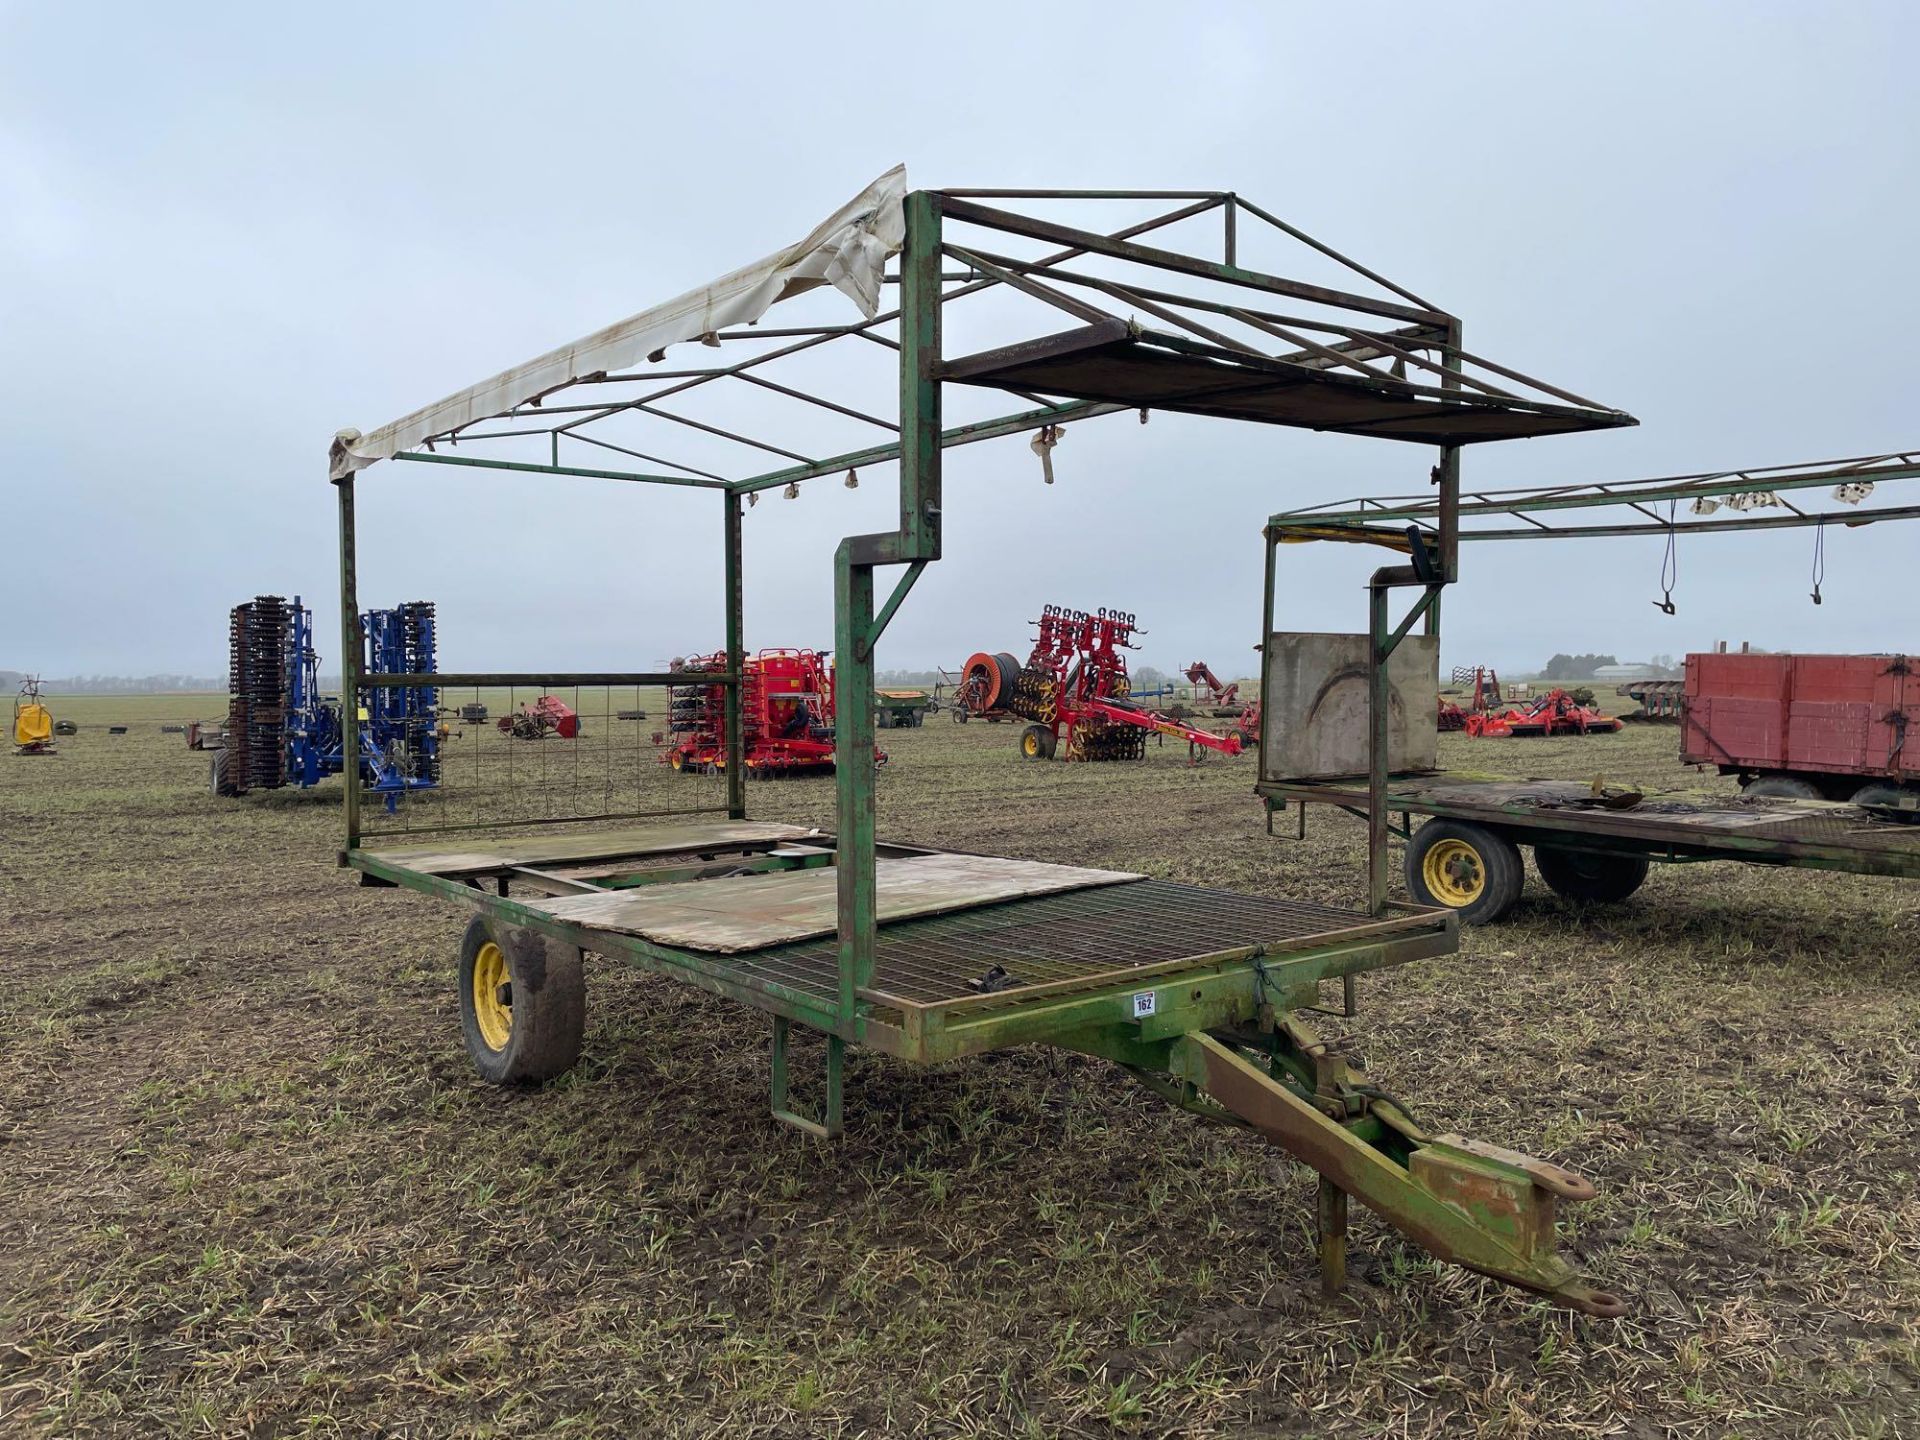 Single axle trailer and frame